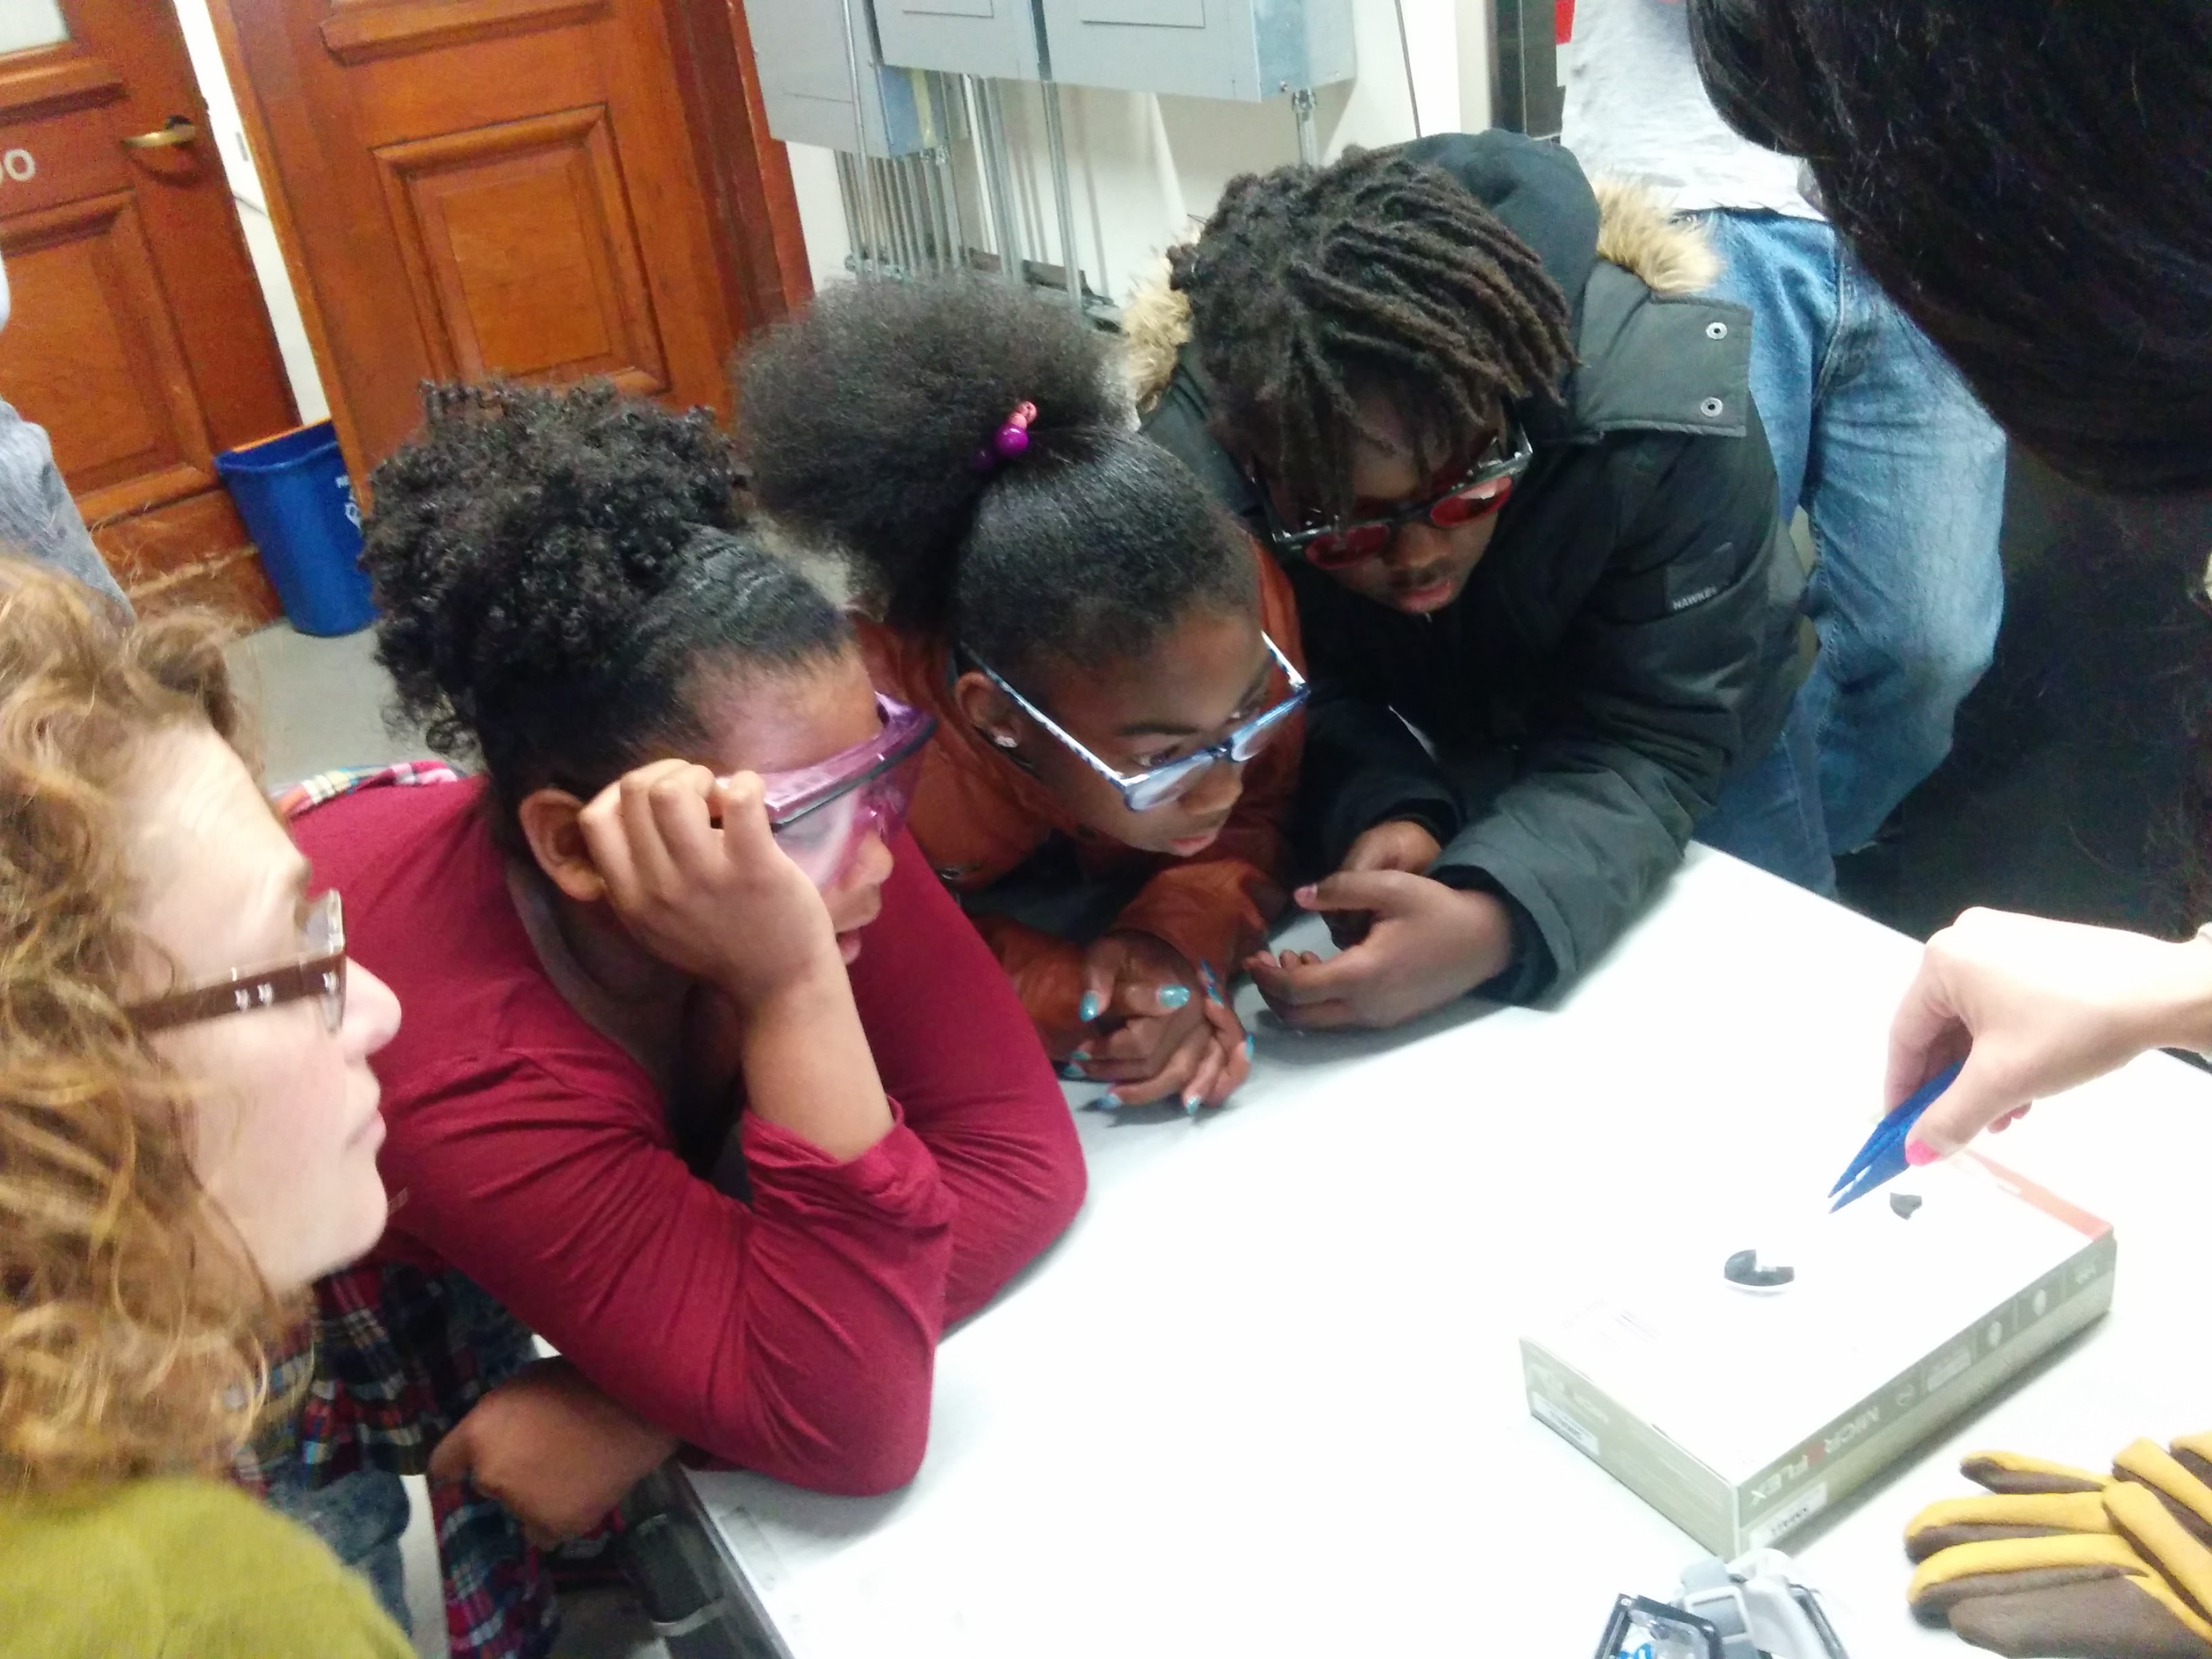 Girls don't just want to play video games.  They want to invent solutions to help people and make the world a better place.  Touch that nerve and you capture a girls' passion.